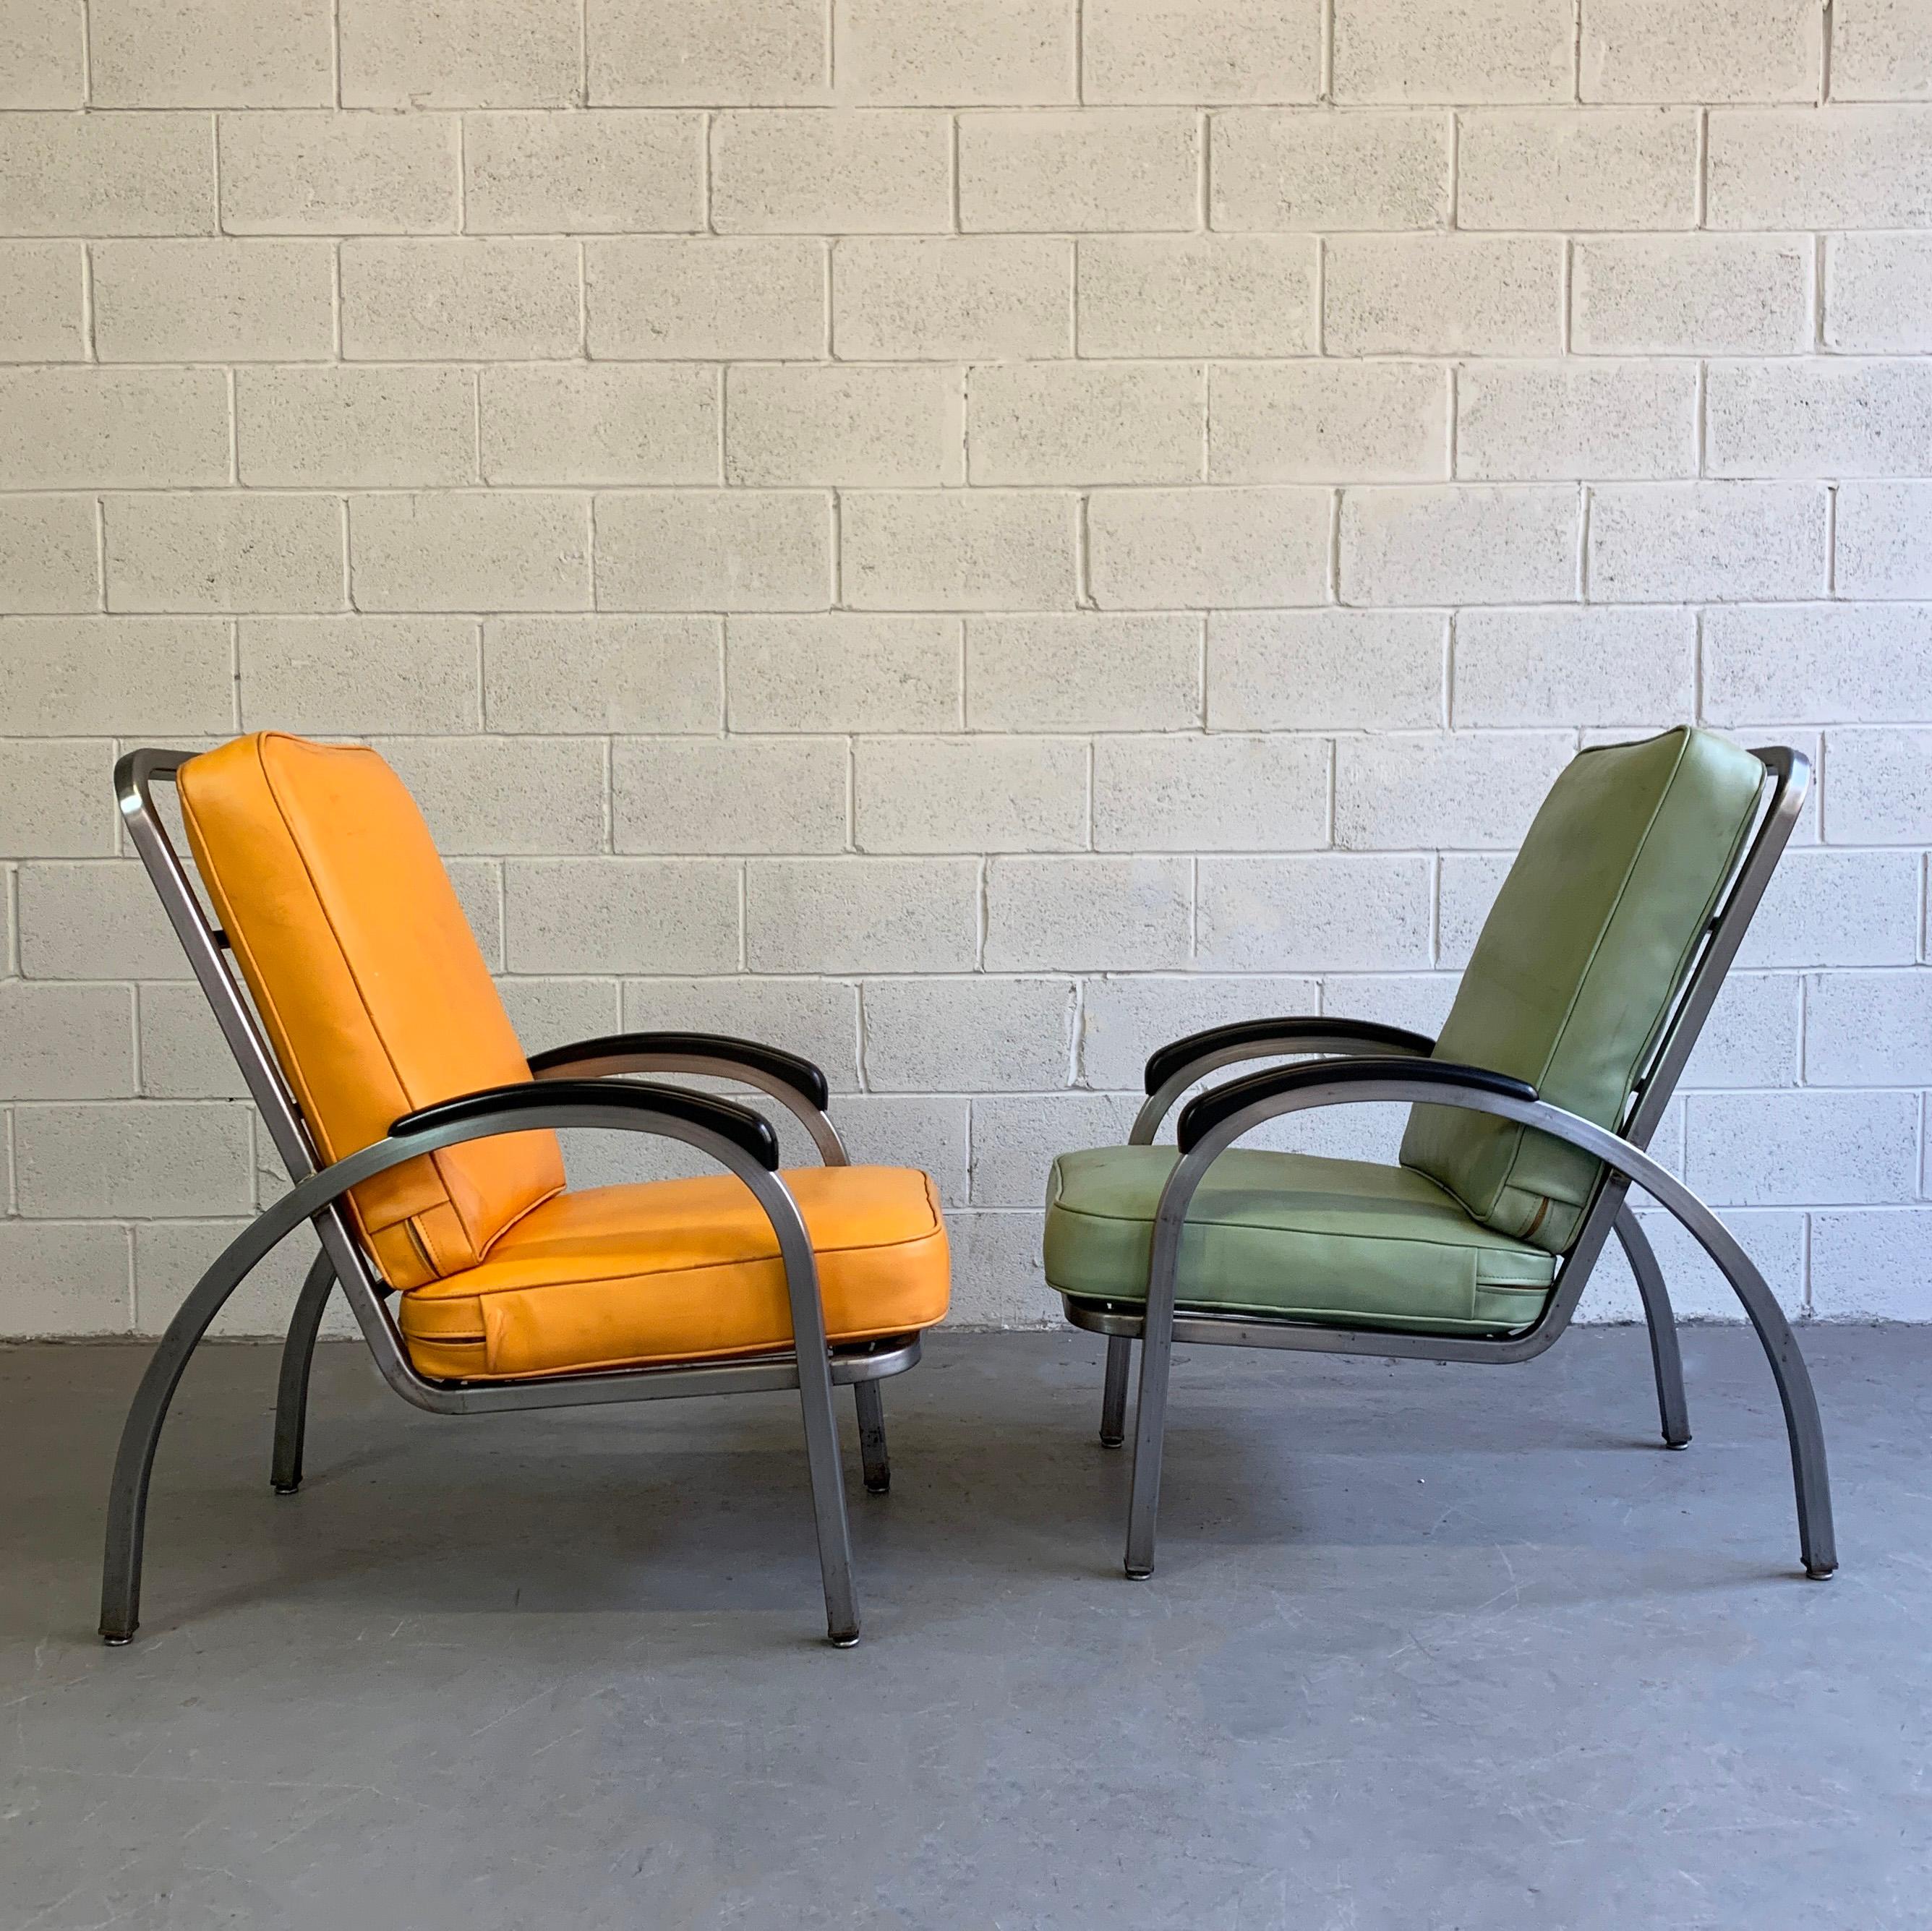 Pair of high back, Art Deco, machine age, armchairs by Norman Bel Geddes for Simmons Company Furniture feature newly brushed steel frames with Bakelite armrests and vinyl covered cushions.